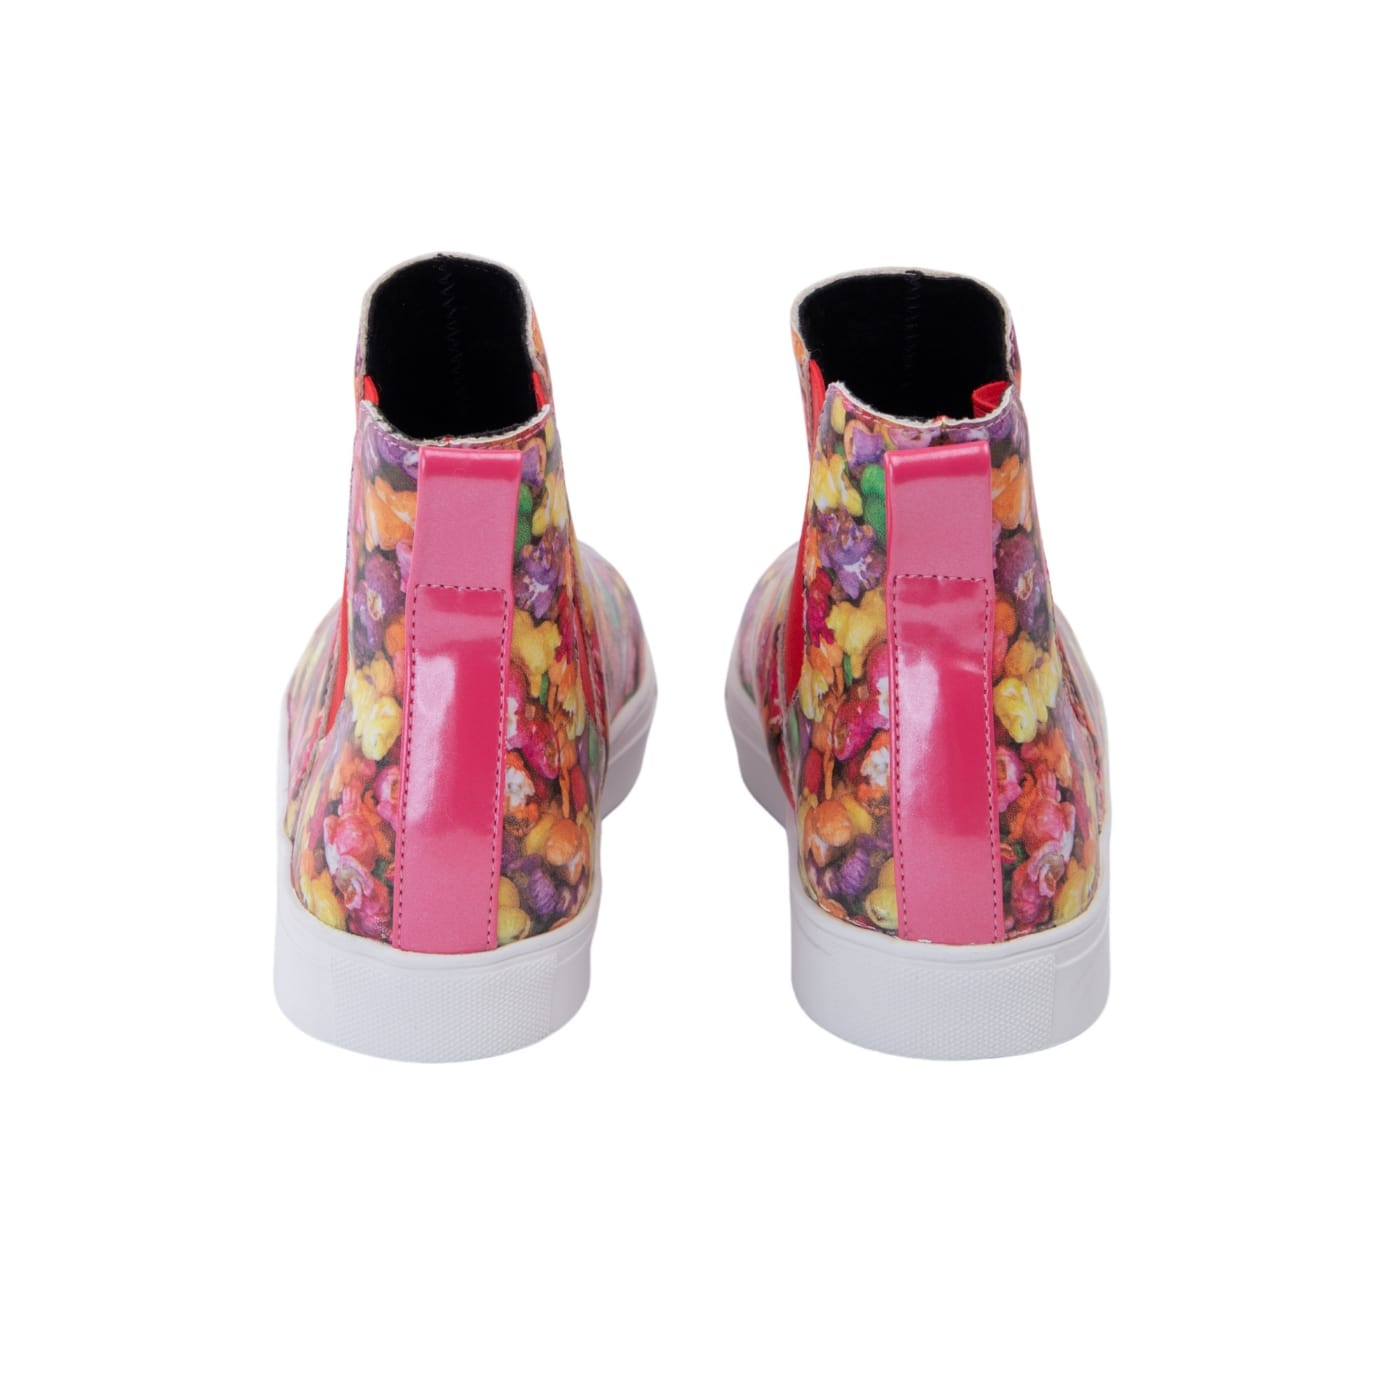 Rainbow Popcorn Hi Tops by RainbowsAndFairies.com.au (Chelsea Boots - Rainbow - Lollies - Foodie - Mismatched Shoes - Elastic Side Boots) - SKU: FW_HITOP_PCORN_ORG - Pic-05